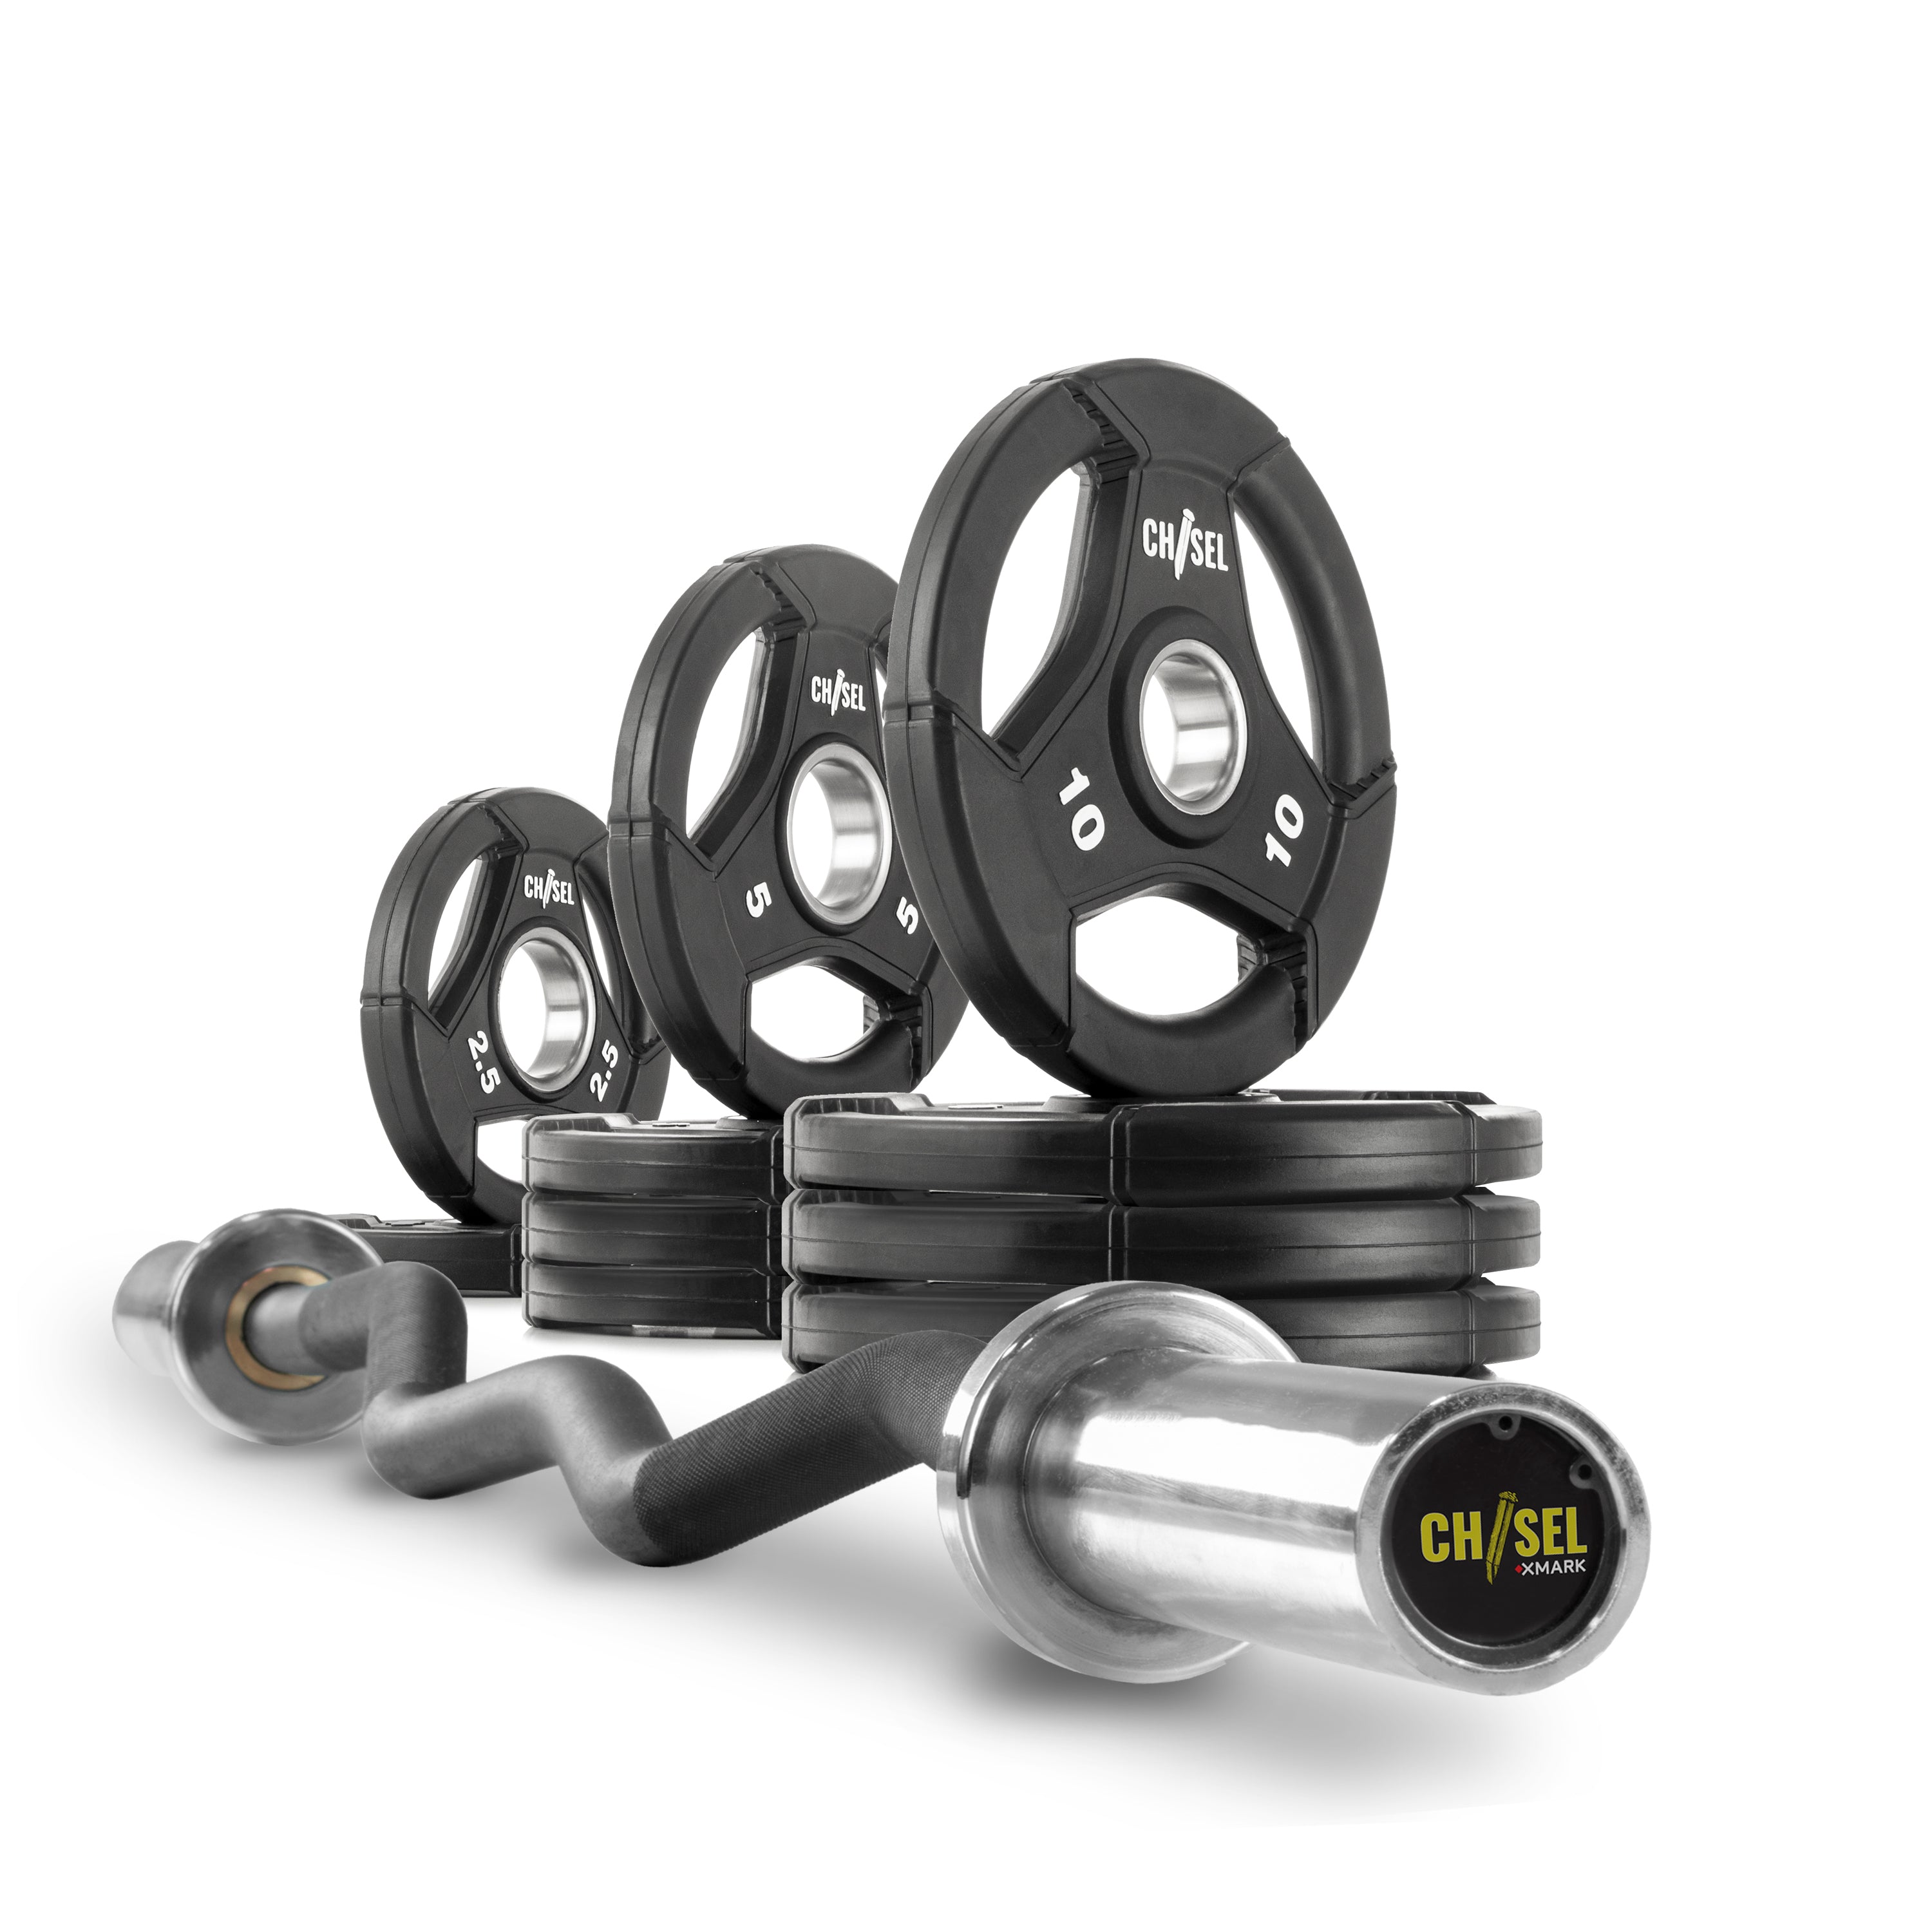 Chisel Curl Bar and Weight Plates Set Builder